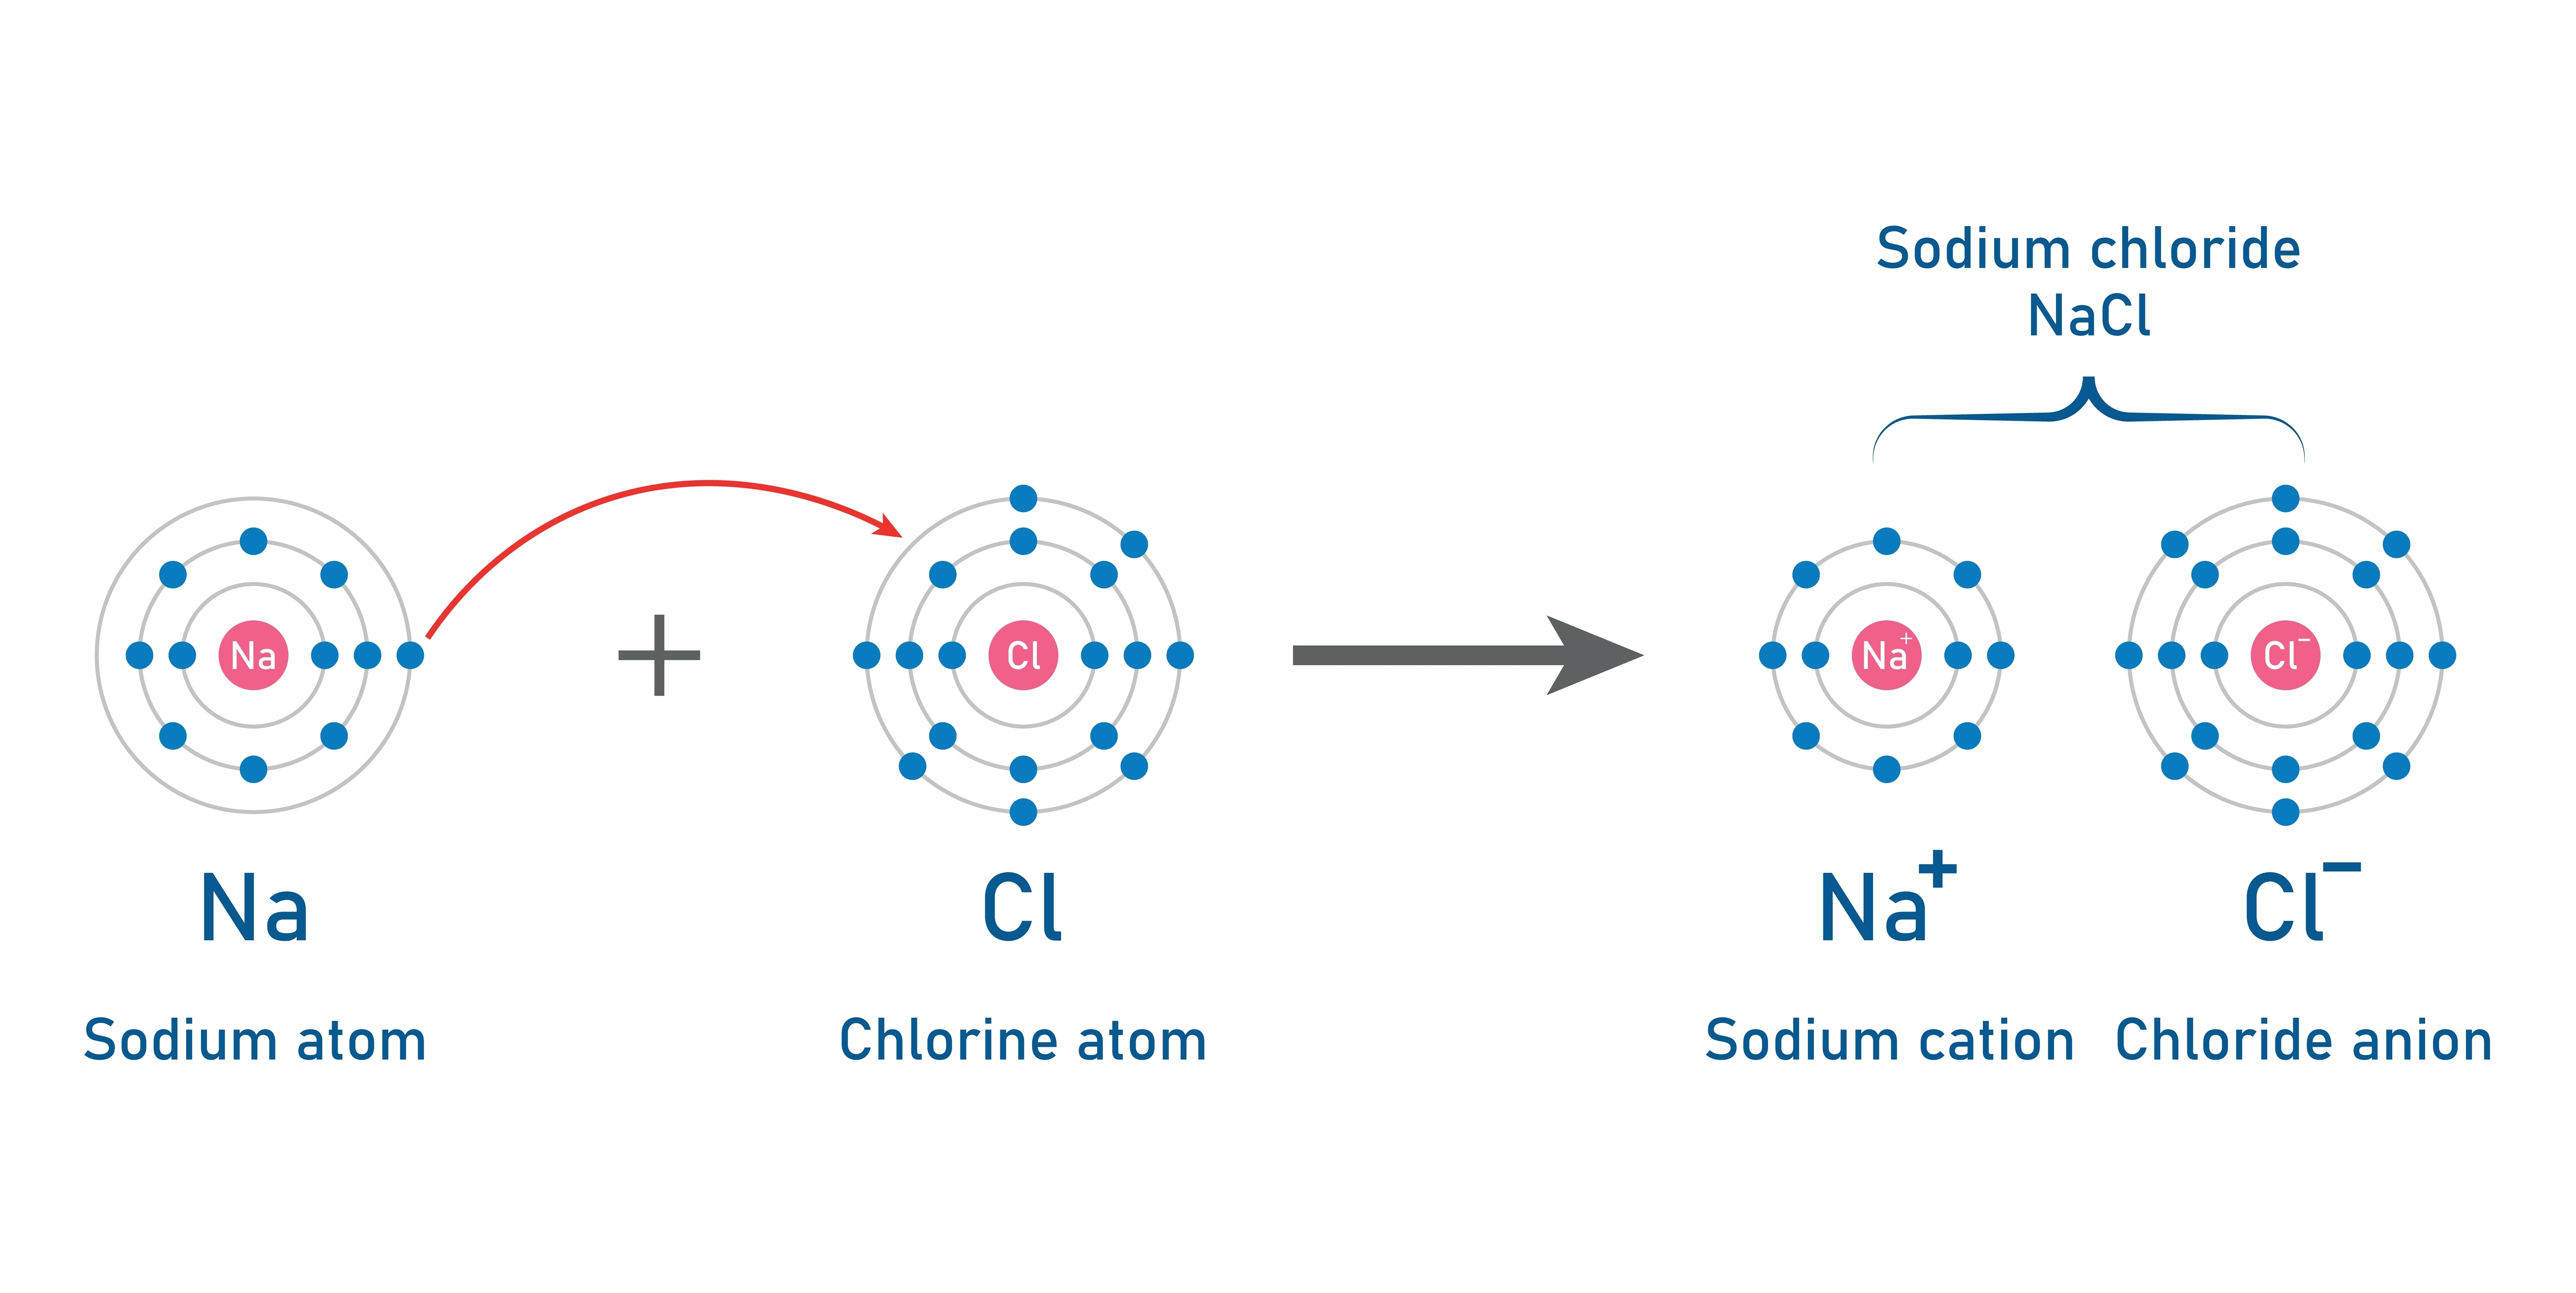 An image of a sodium chloride compound